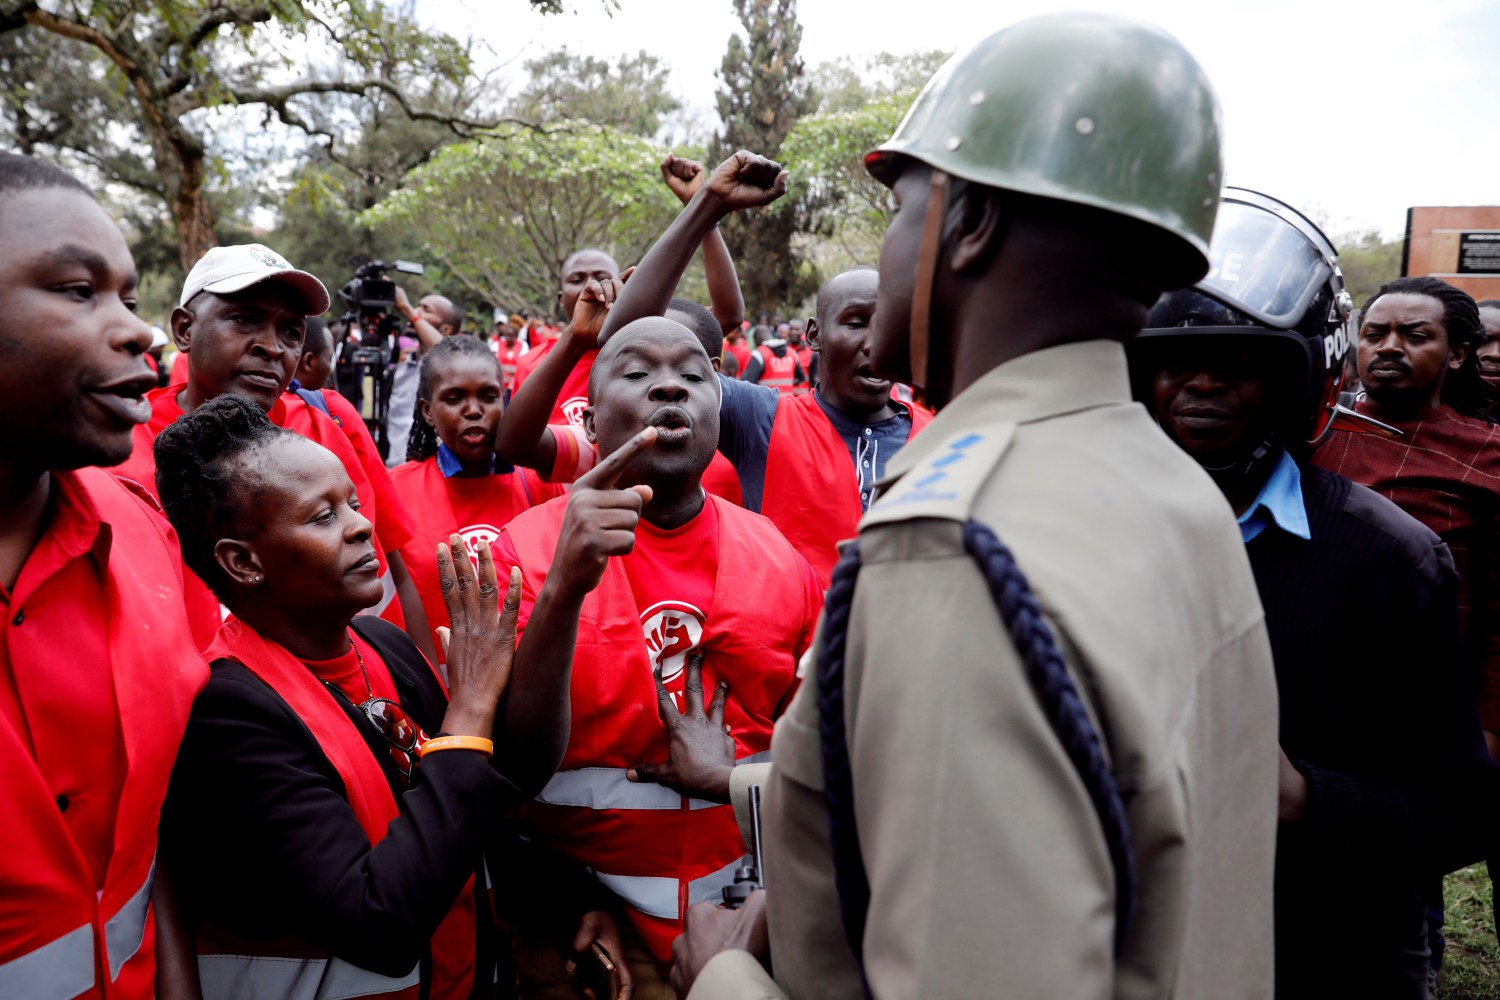 Protesters confront a Kenyan police officer during an anti corruption protest in Nairobi, Kenya, April 30, 2019. REUTERS/Baz Ratner - RC19AB39F5A0